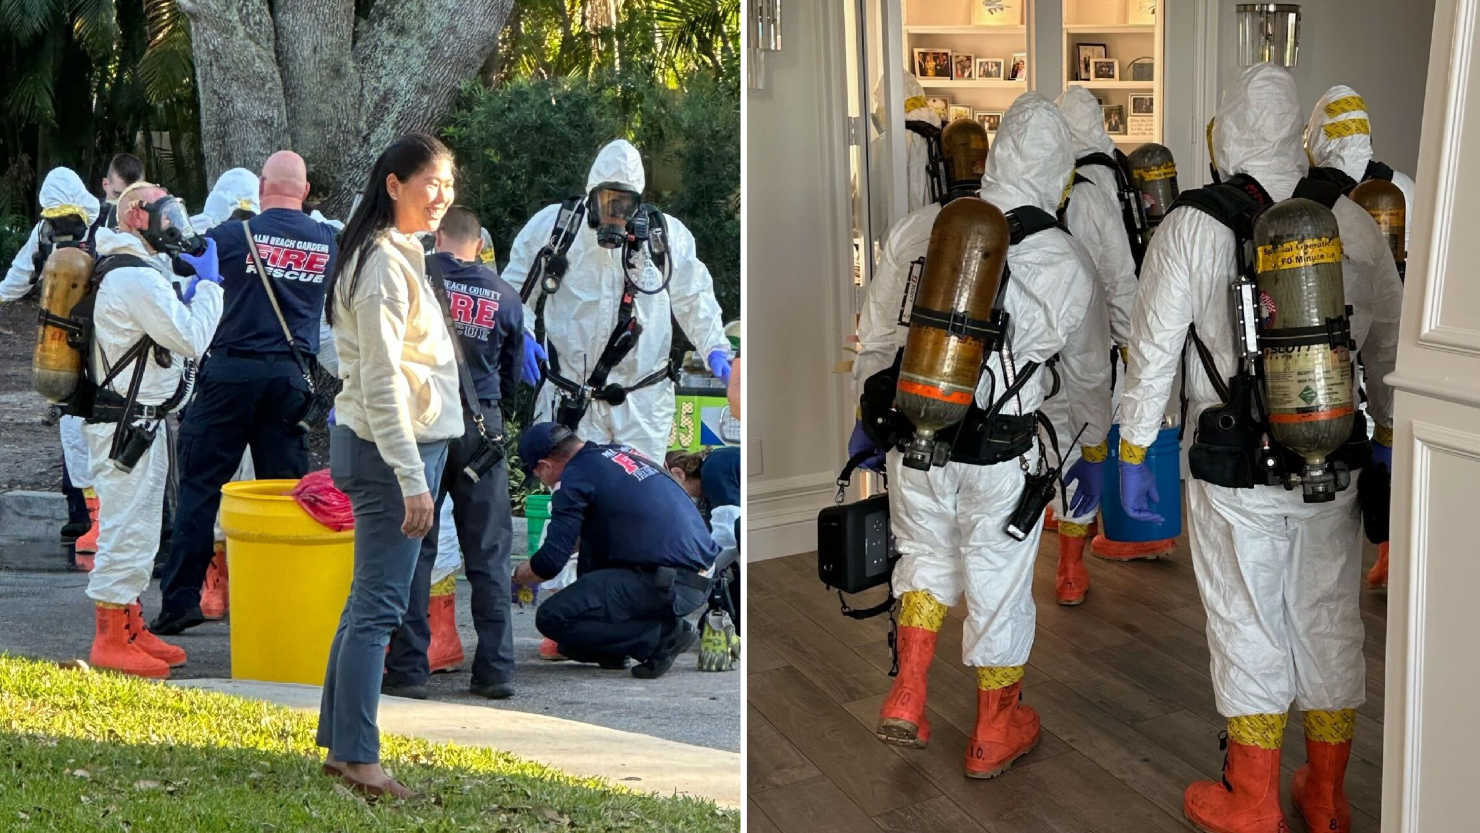 Hazmat teams spotted at Don Jr.'s Florida home after white powder found